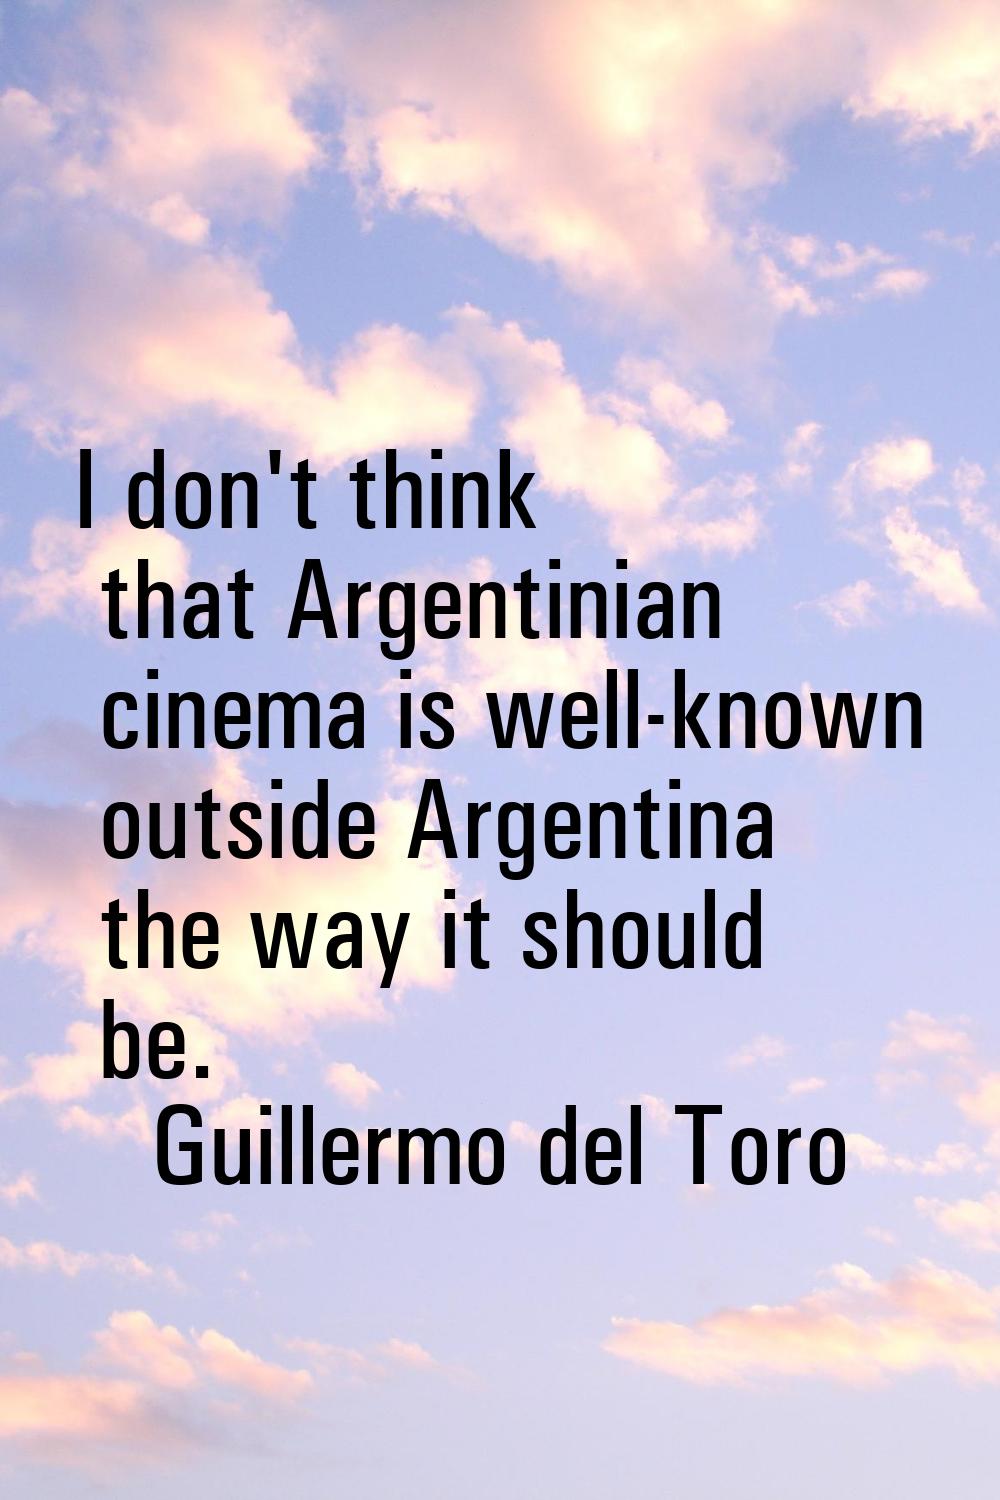 I don't think that Argentinian cinema is well-known outside Argentina the way it should be.